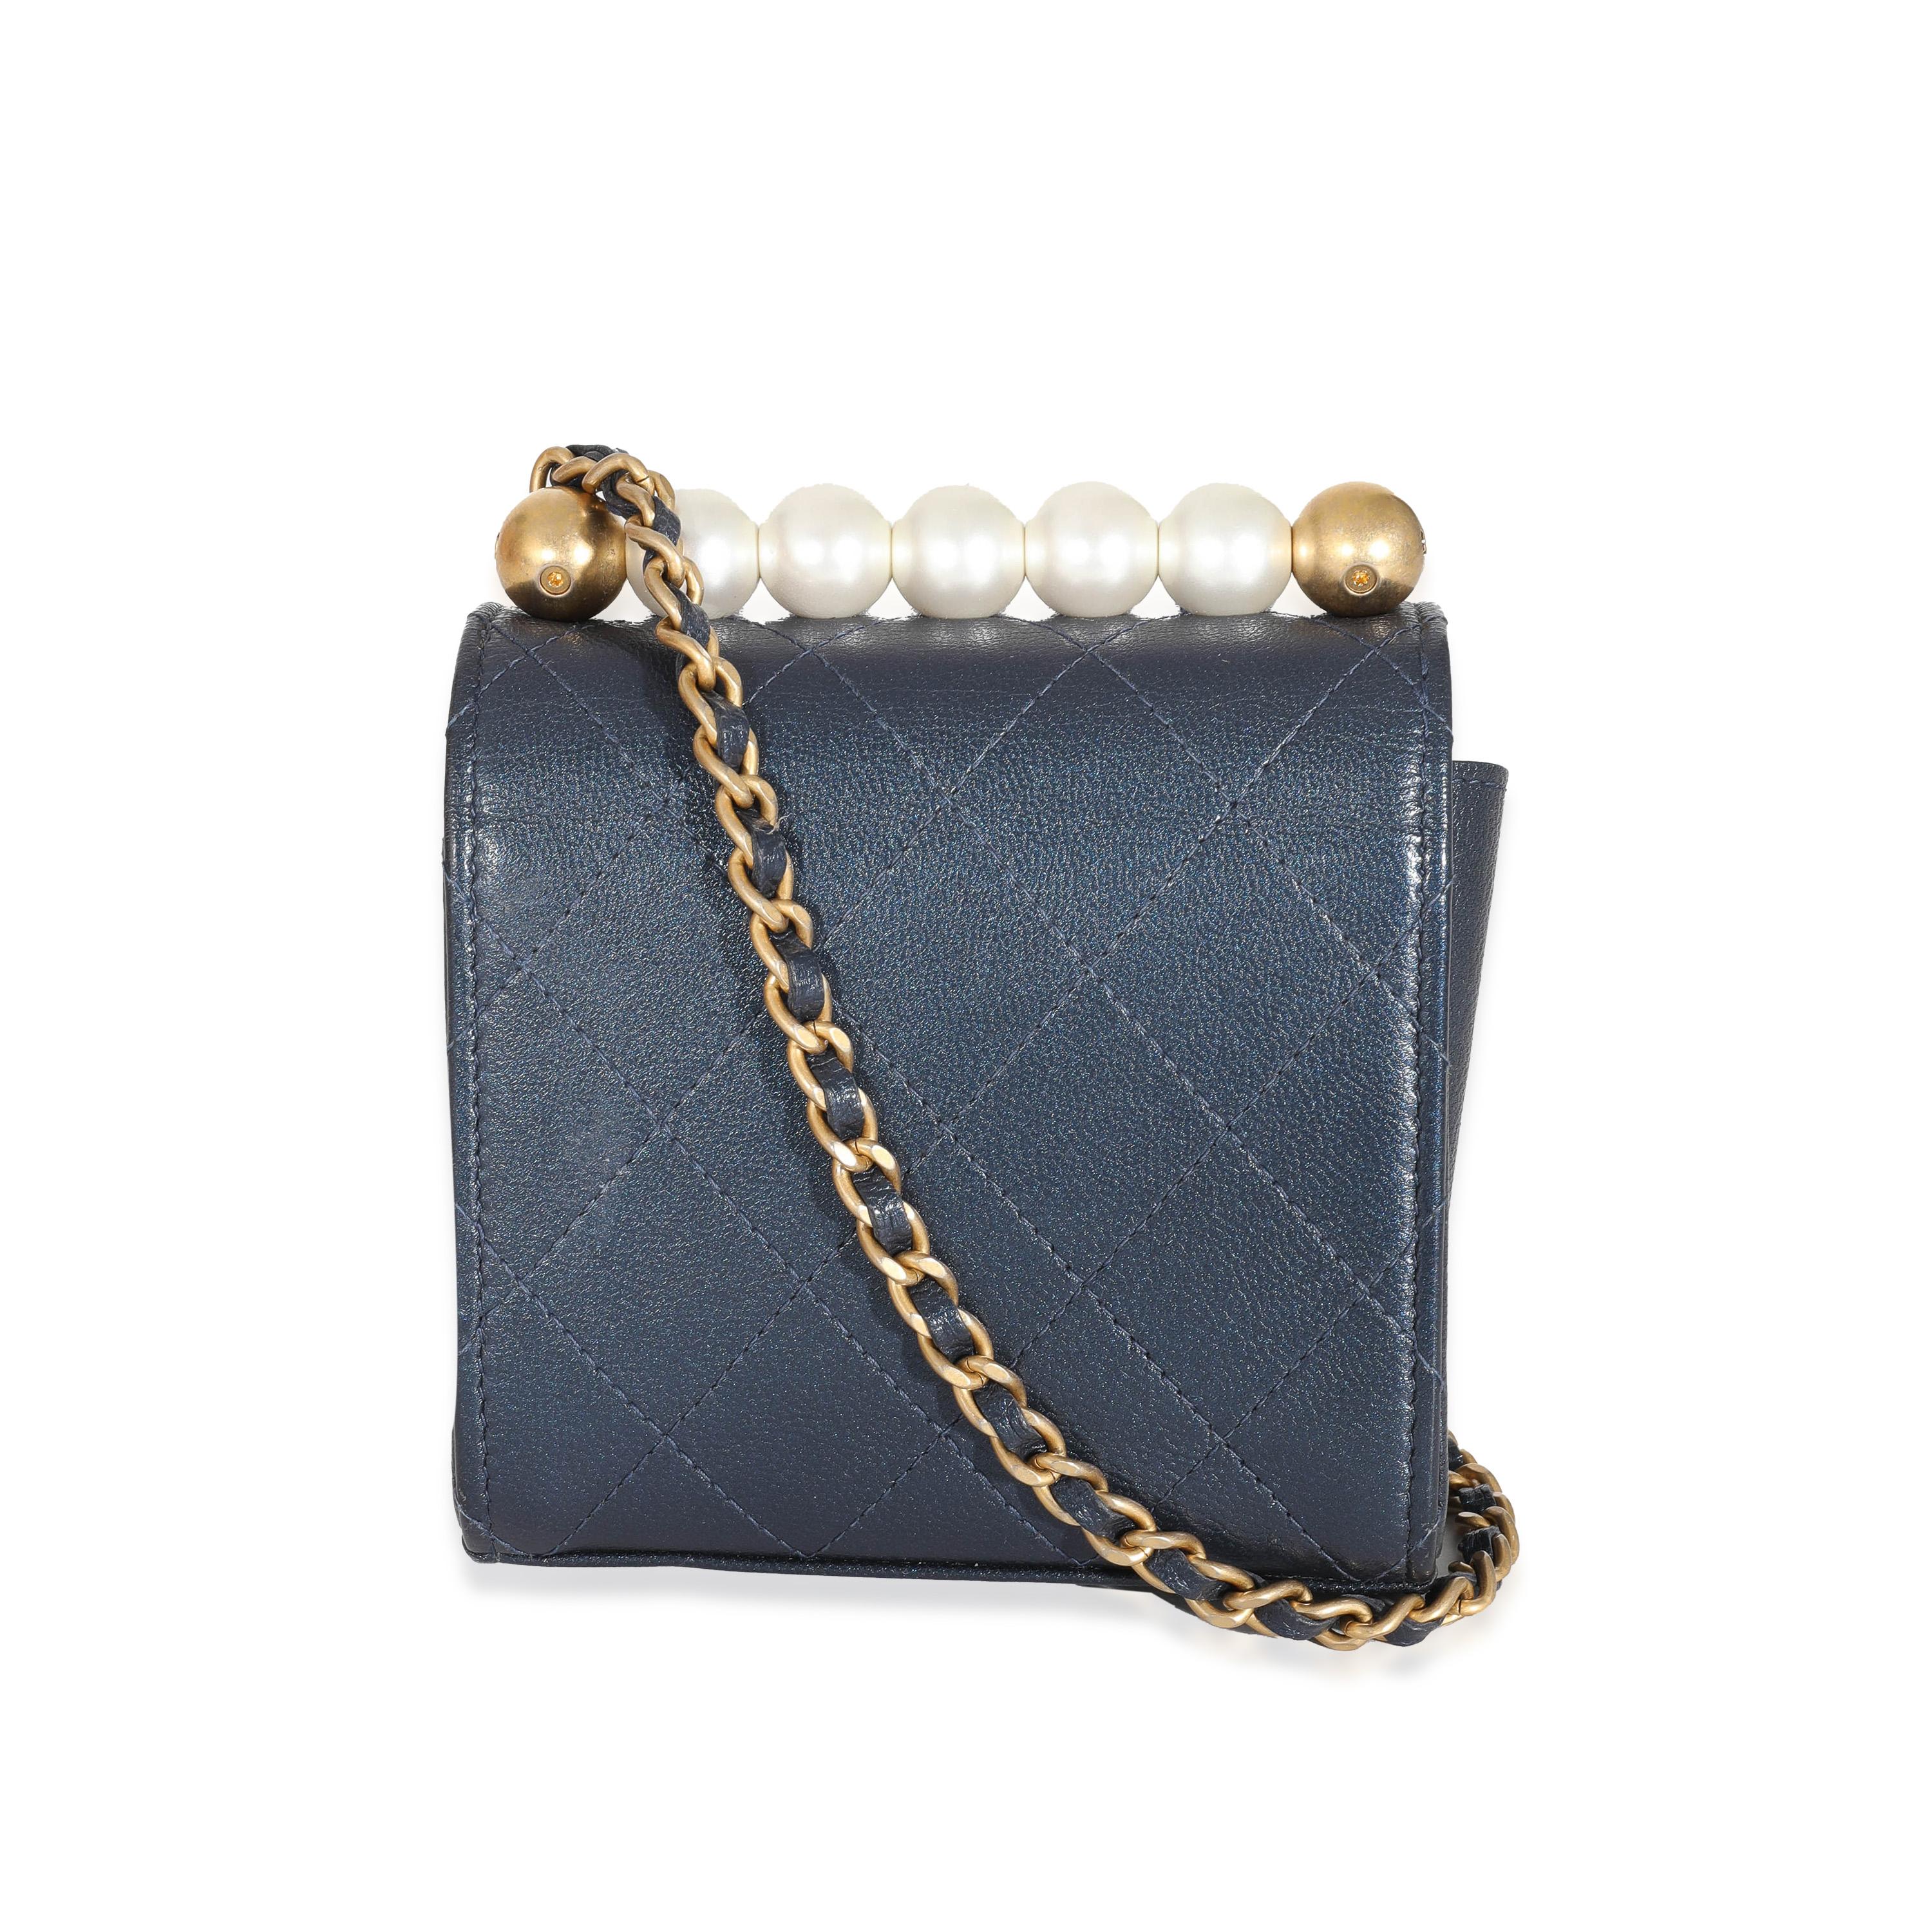 Chanel Navy Goatskin Chic Pearls Mini Flap Bag For Sale 3